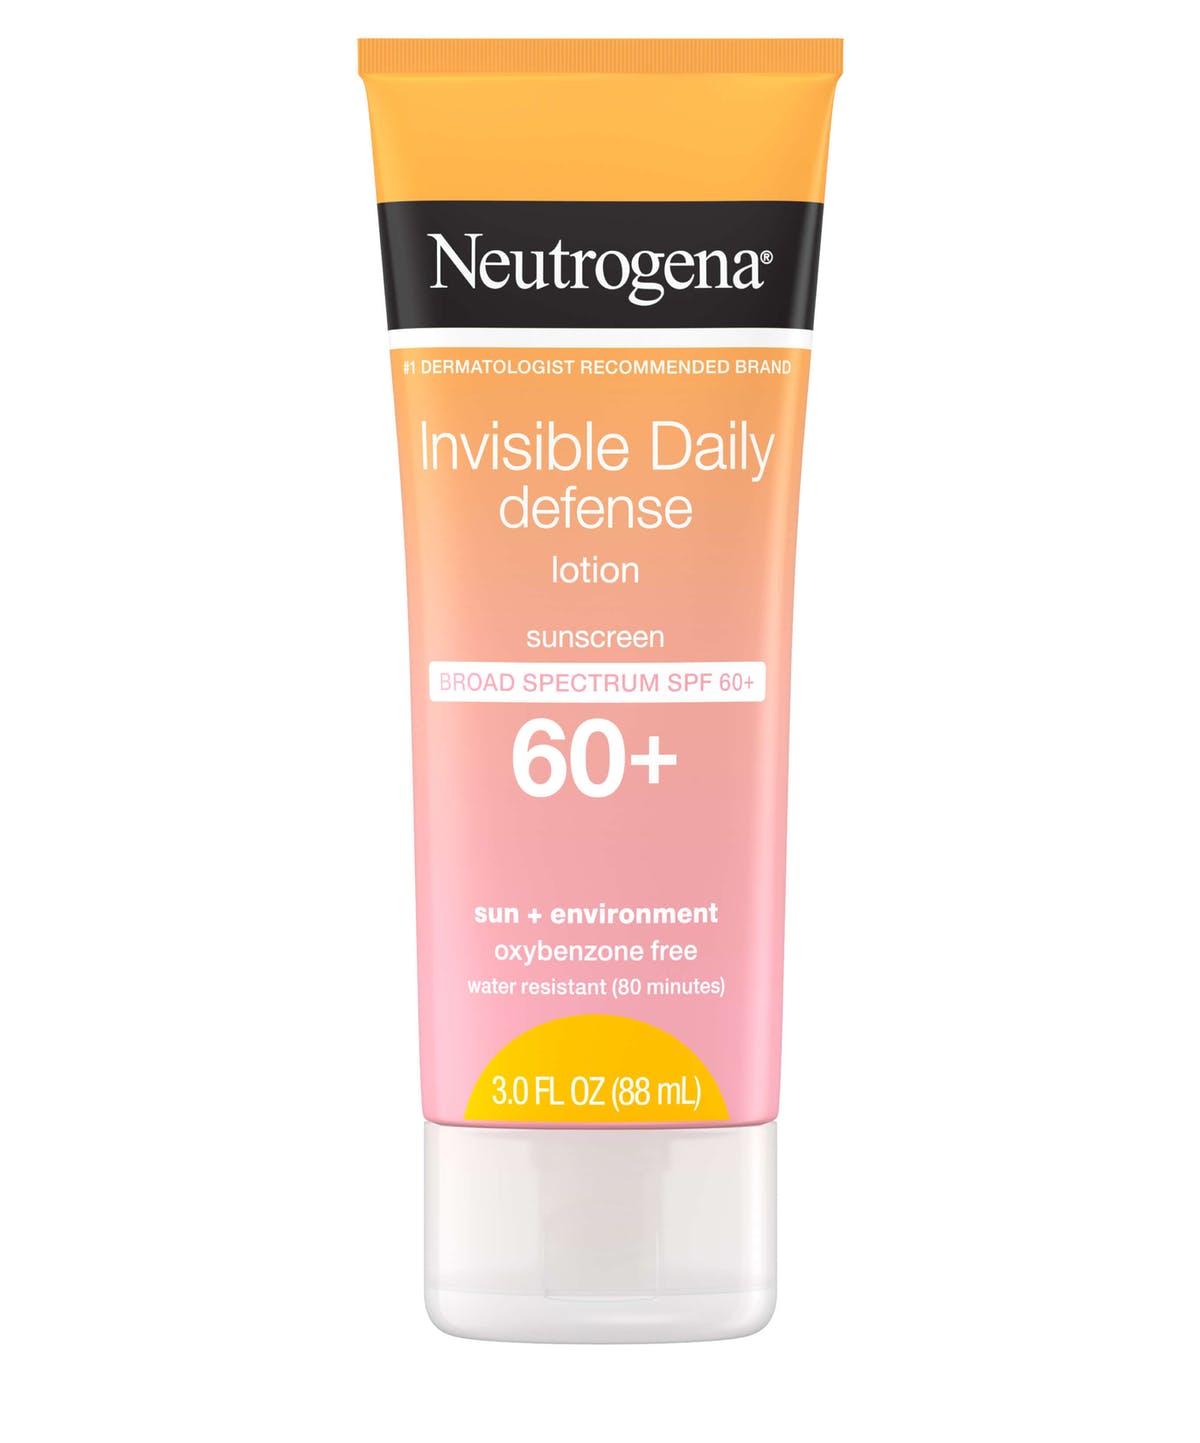 Neutrogena Invisible SPF 60+ Daily Defence Lotion